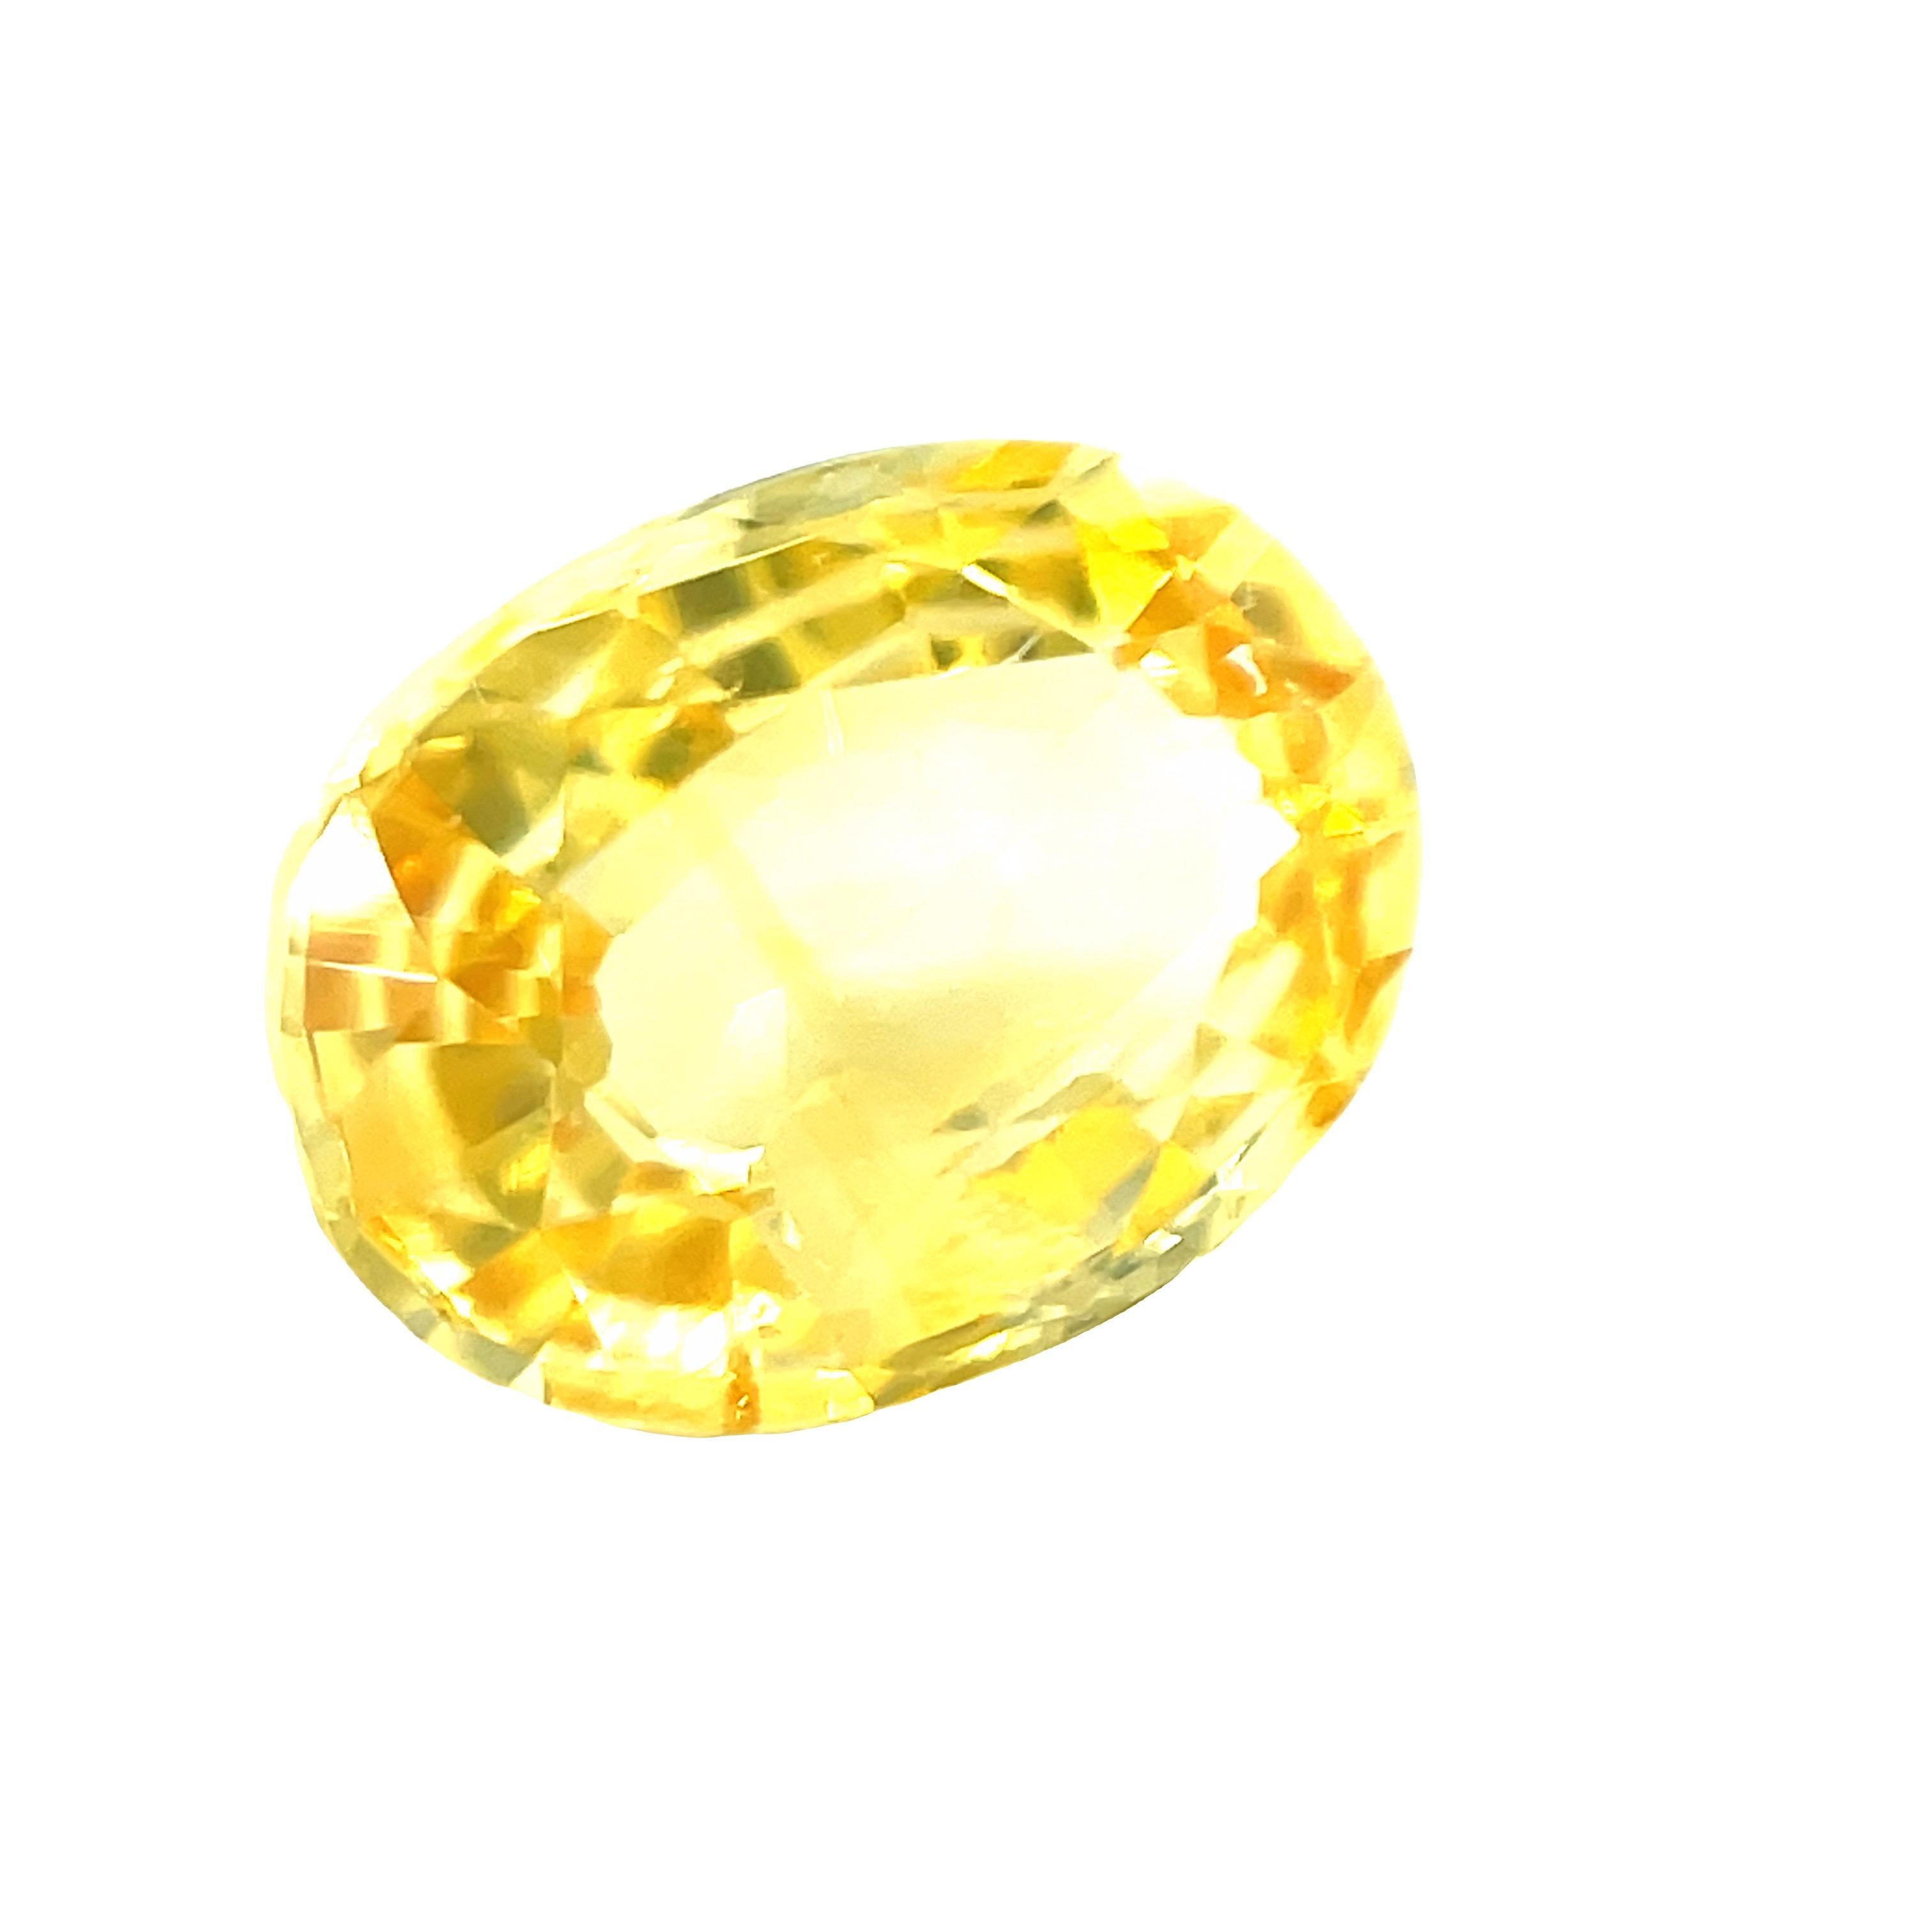 Oval Cut 3.22 Carat Oval Yellow Sapphire Loose Unset 3-Stone Ring or Pendant Gemstone For Sale